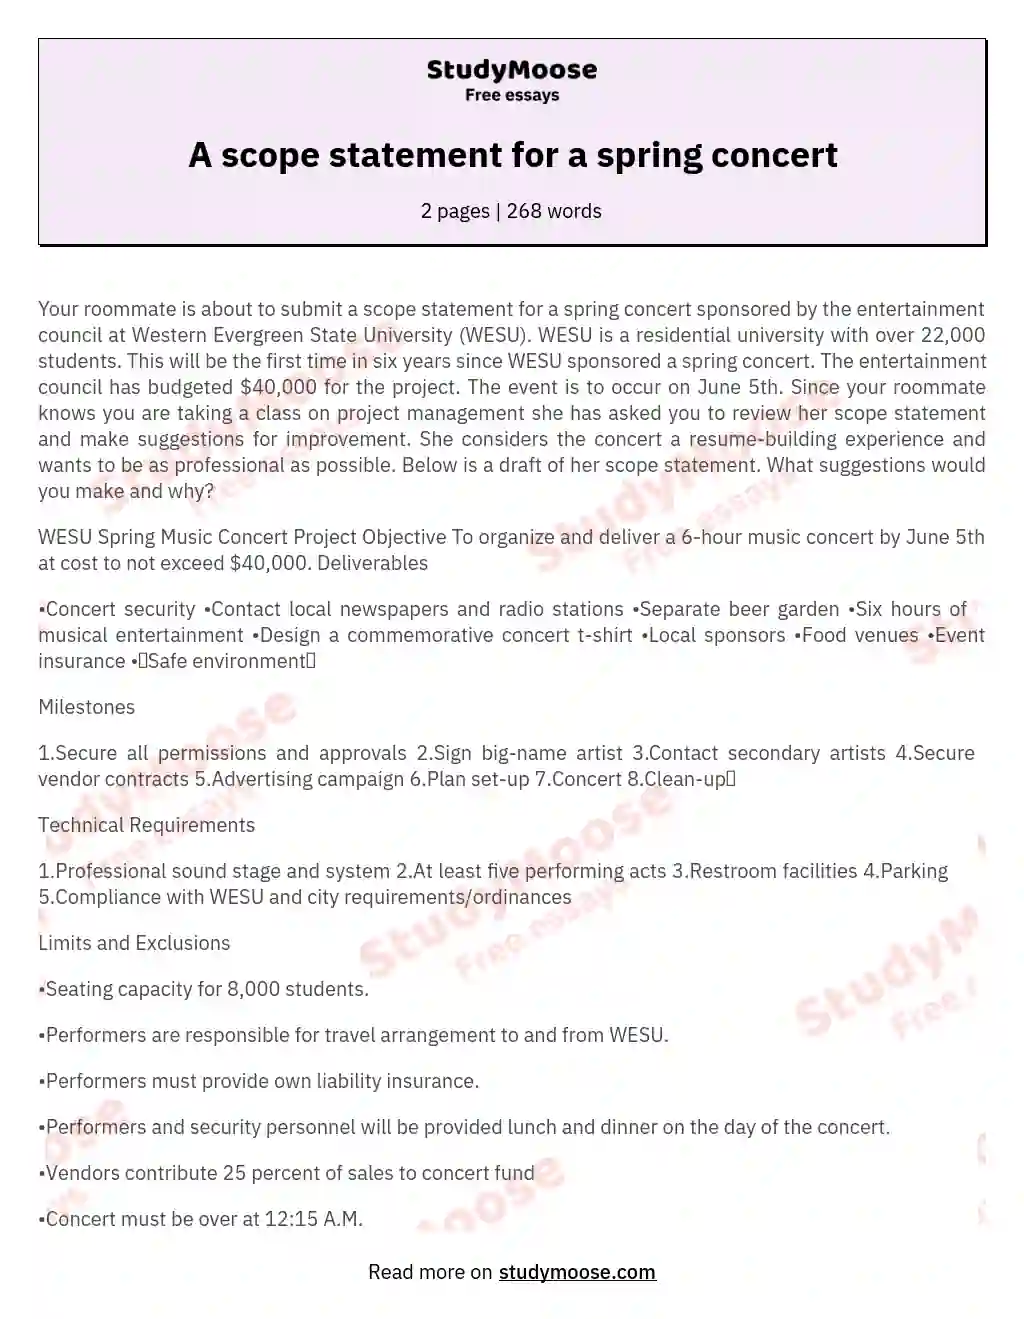 A scope statement for a spring concert